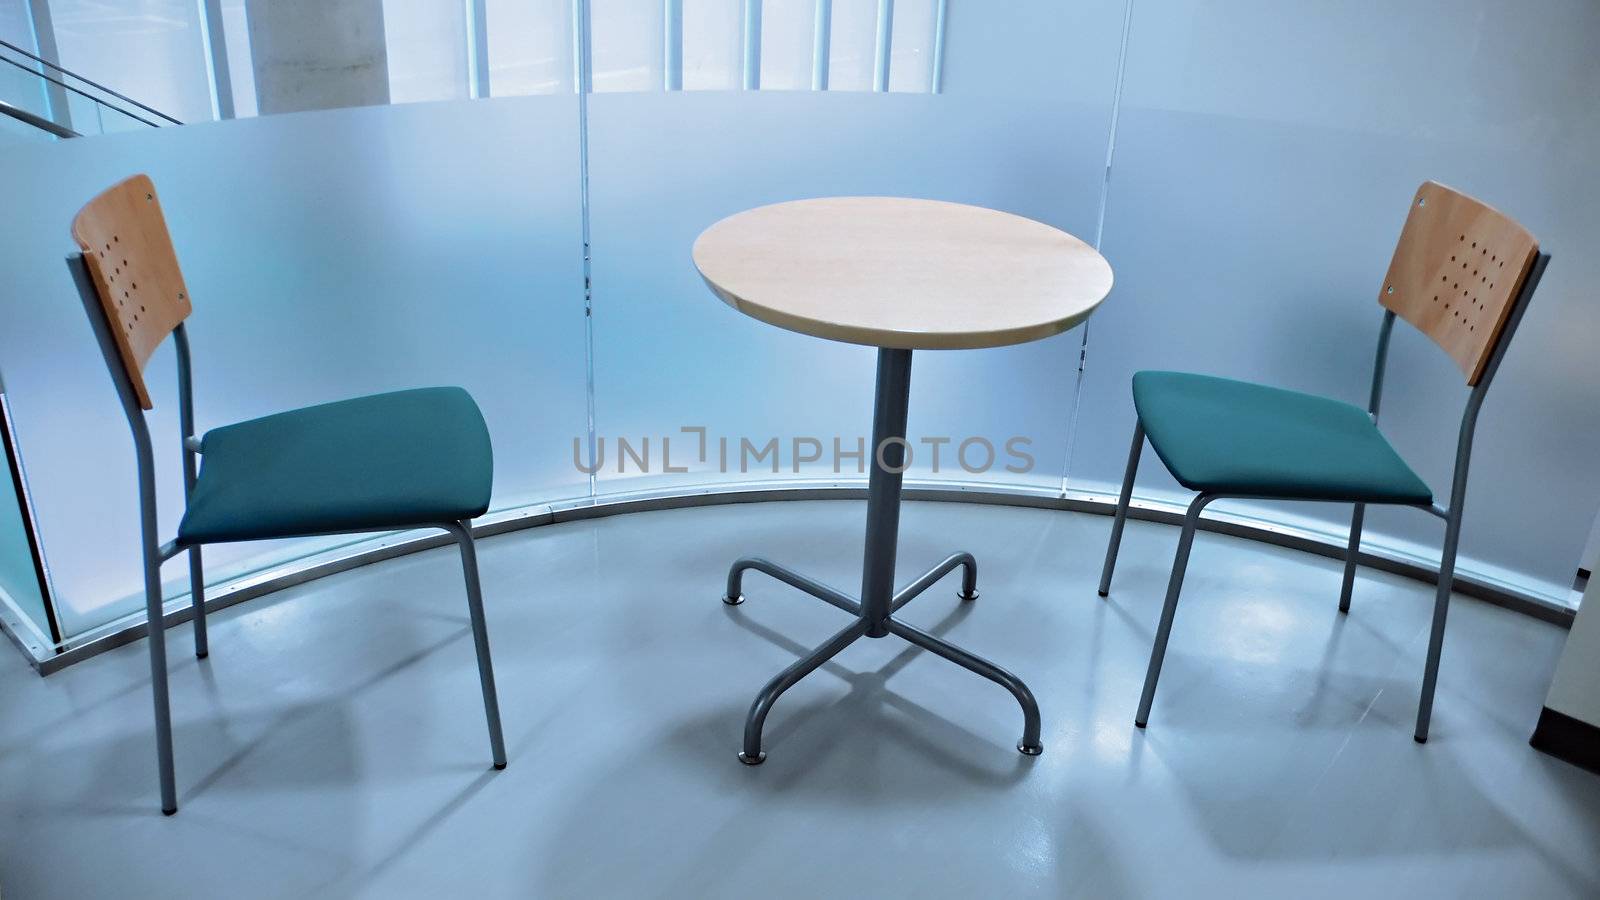 two chairs and round table in modern office interior